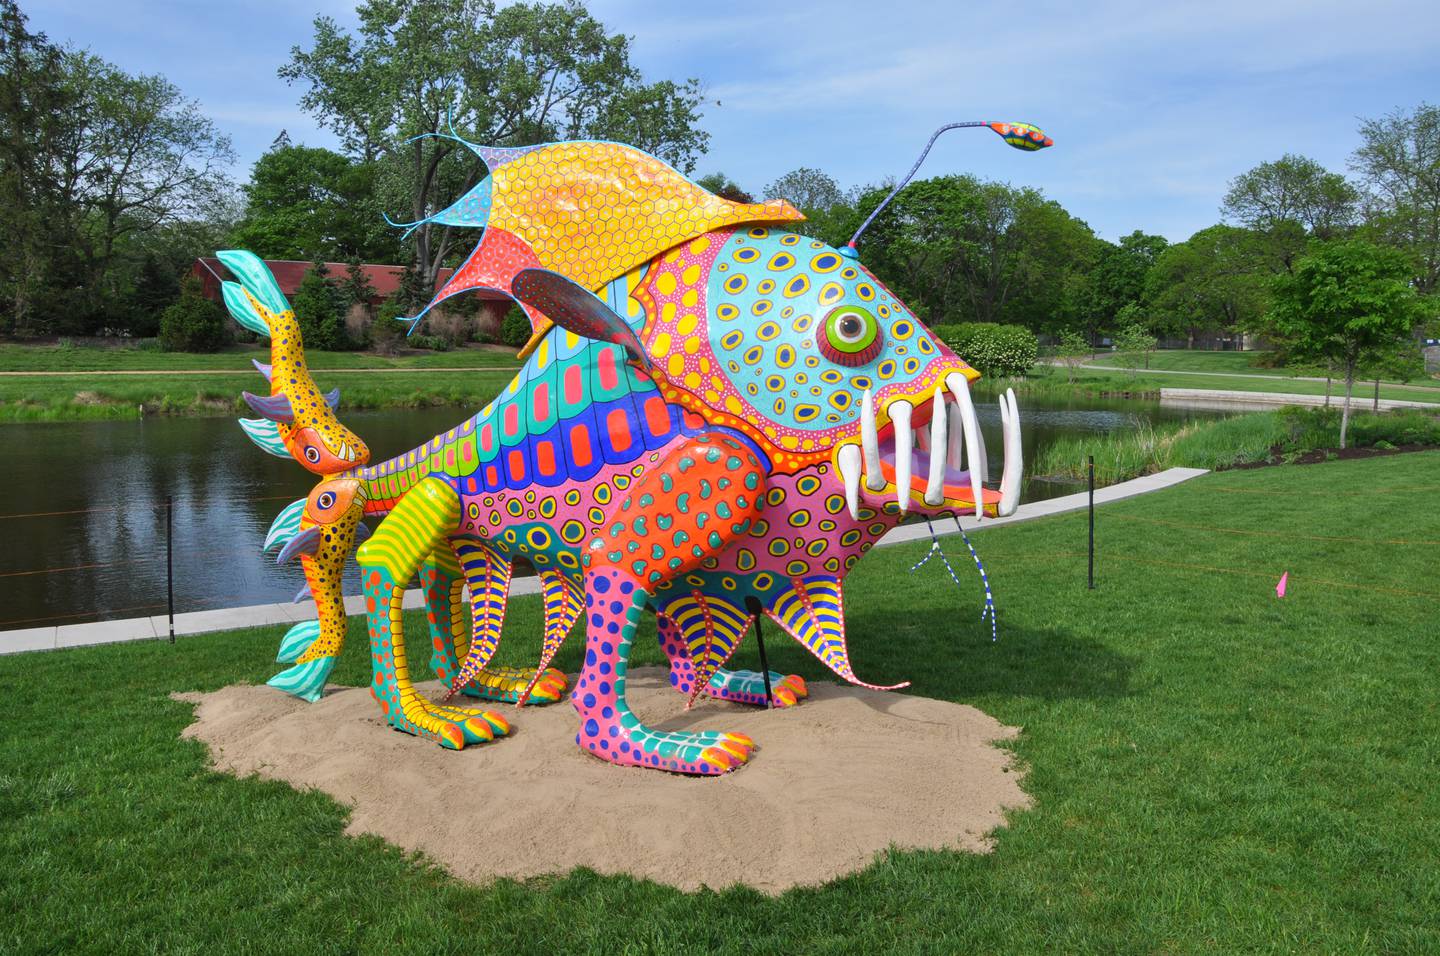 “Patapez,” which translates to “Fishlegs,” is by Alejandro Camacho Barrera, one of six artists creating alebrijes sculptures.